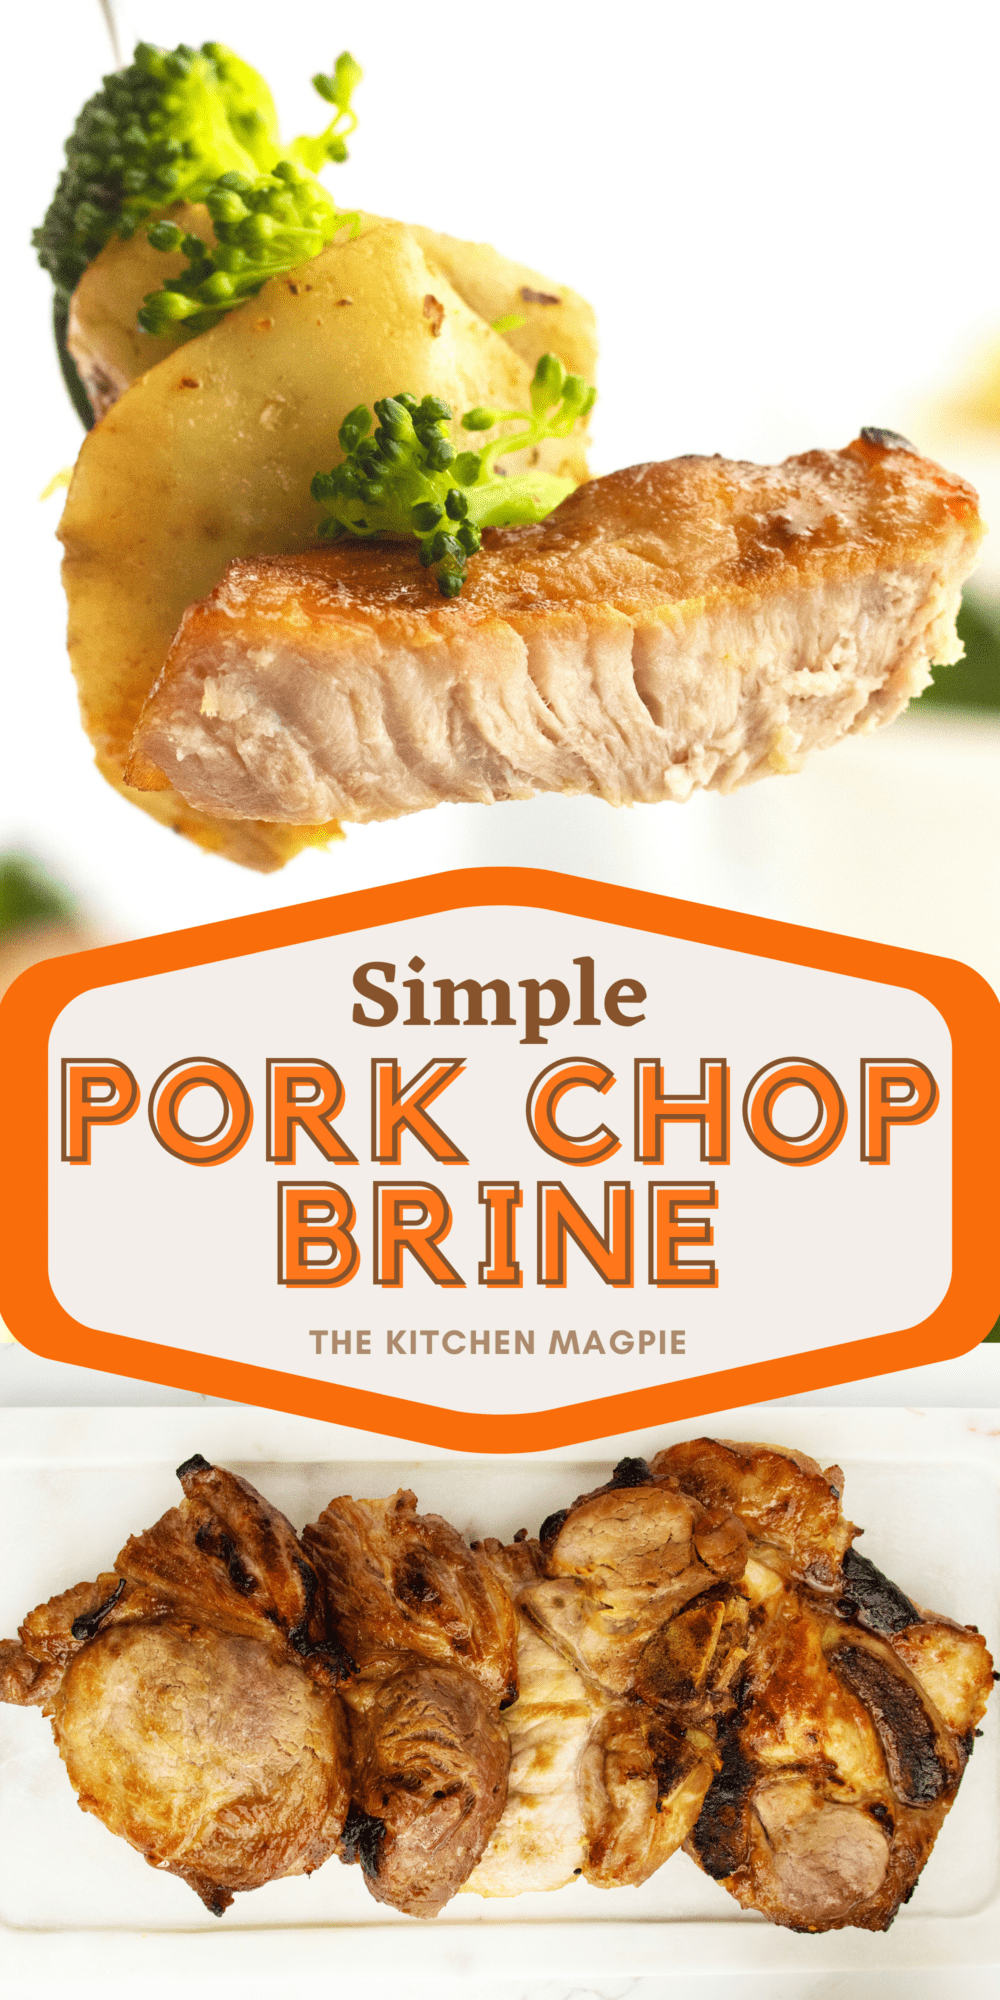 This quick and simple pork chop brine makes a delicious coating on the outside of the chop with a moist and delicious inside. Perfect for grilling!